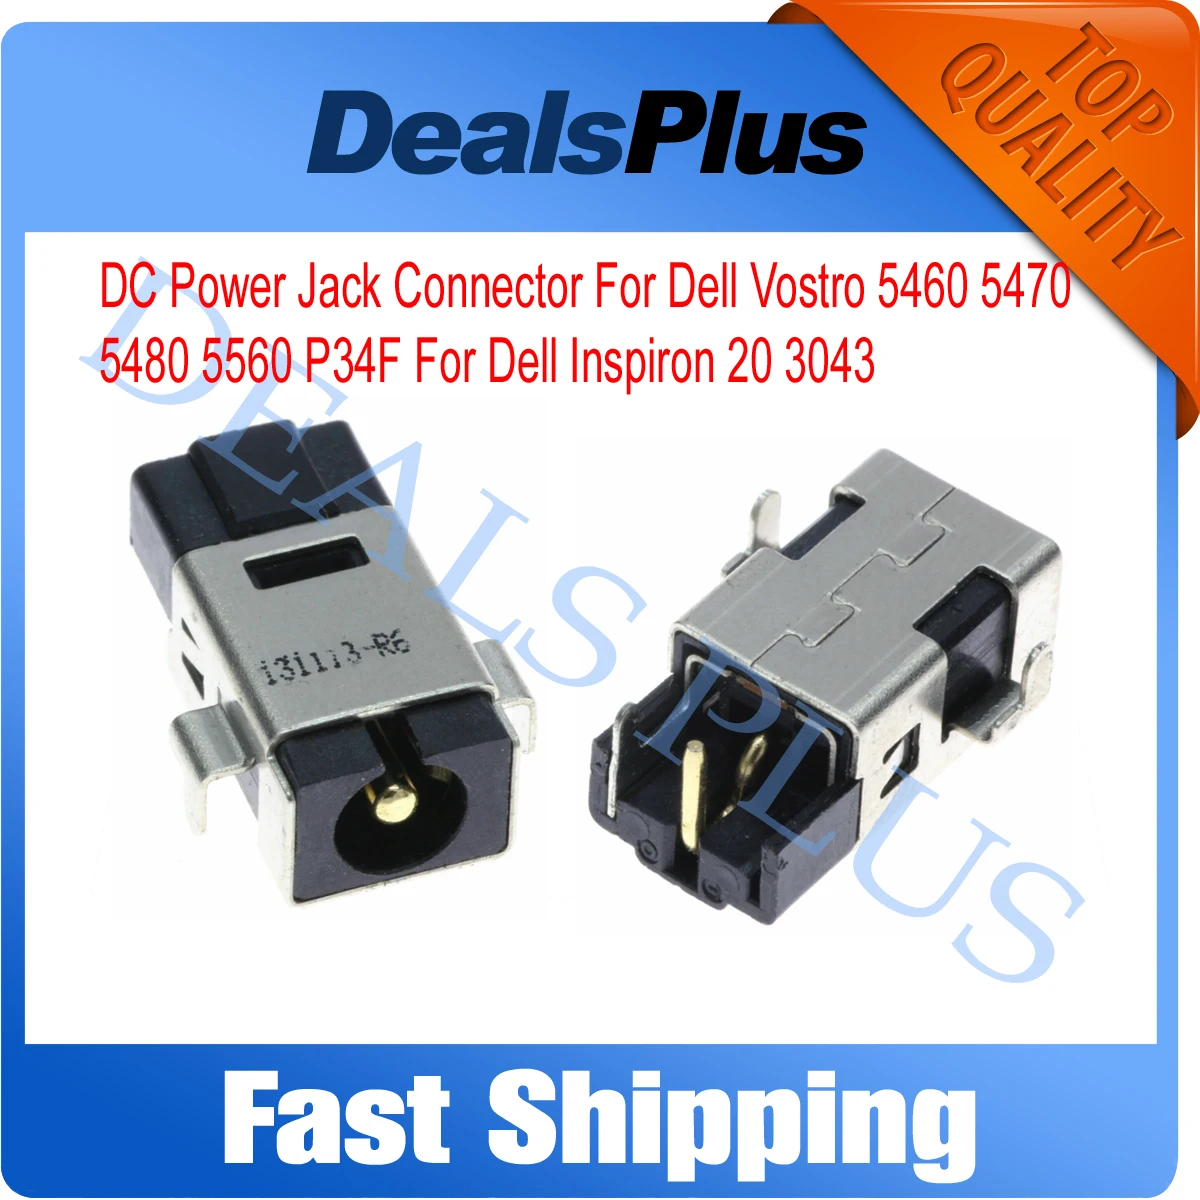 

New Replacement Laptop DC Power Jack Charging Port Connector For Dell Vostro 5460 5470 5480 5560 P34F Inspiron 20 3043